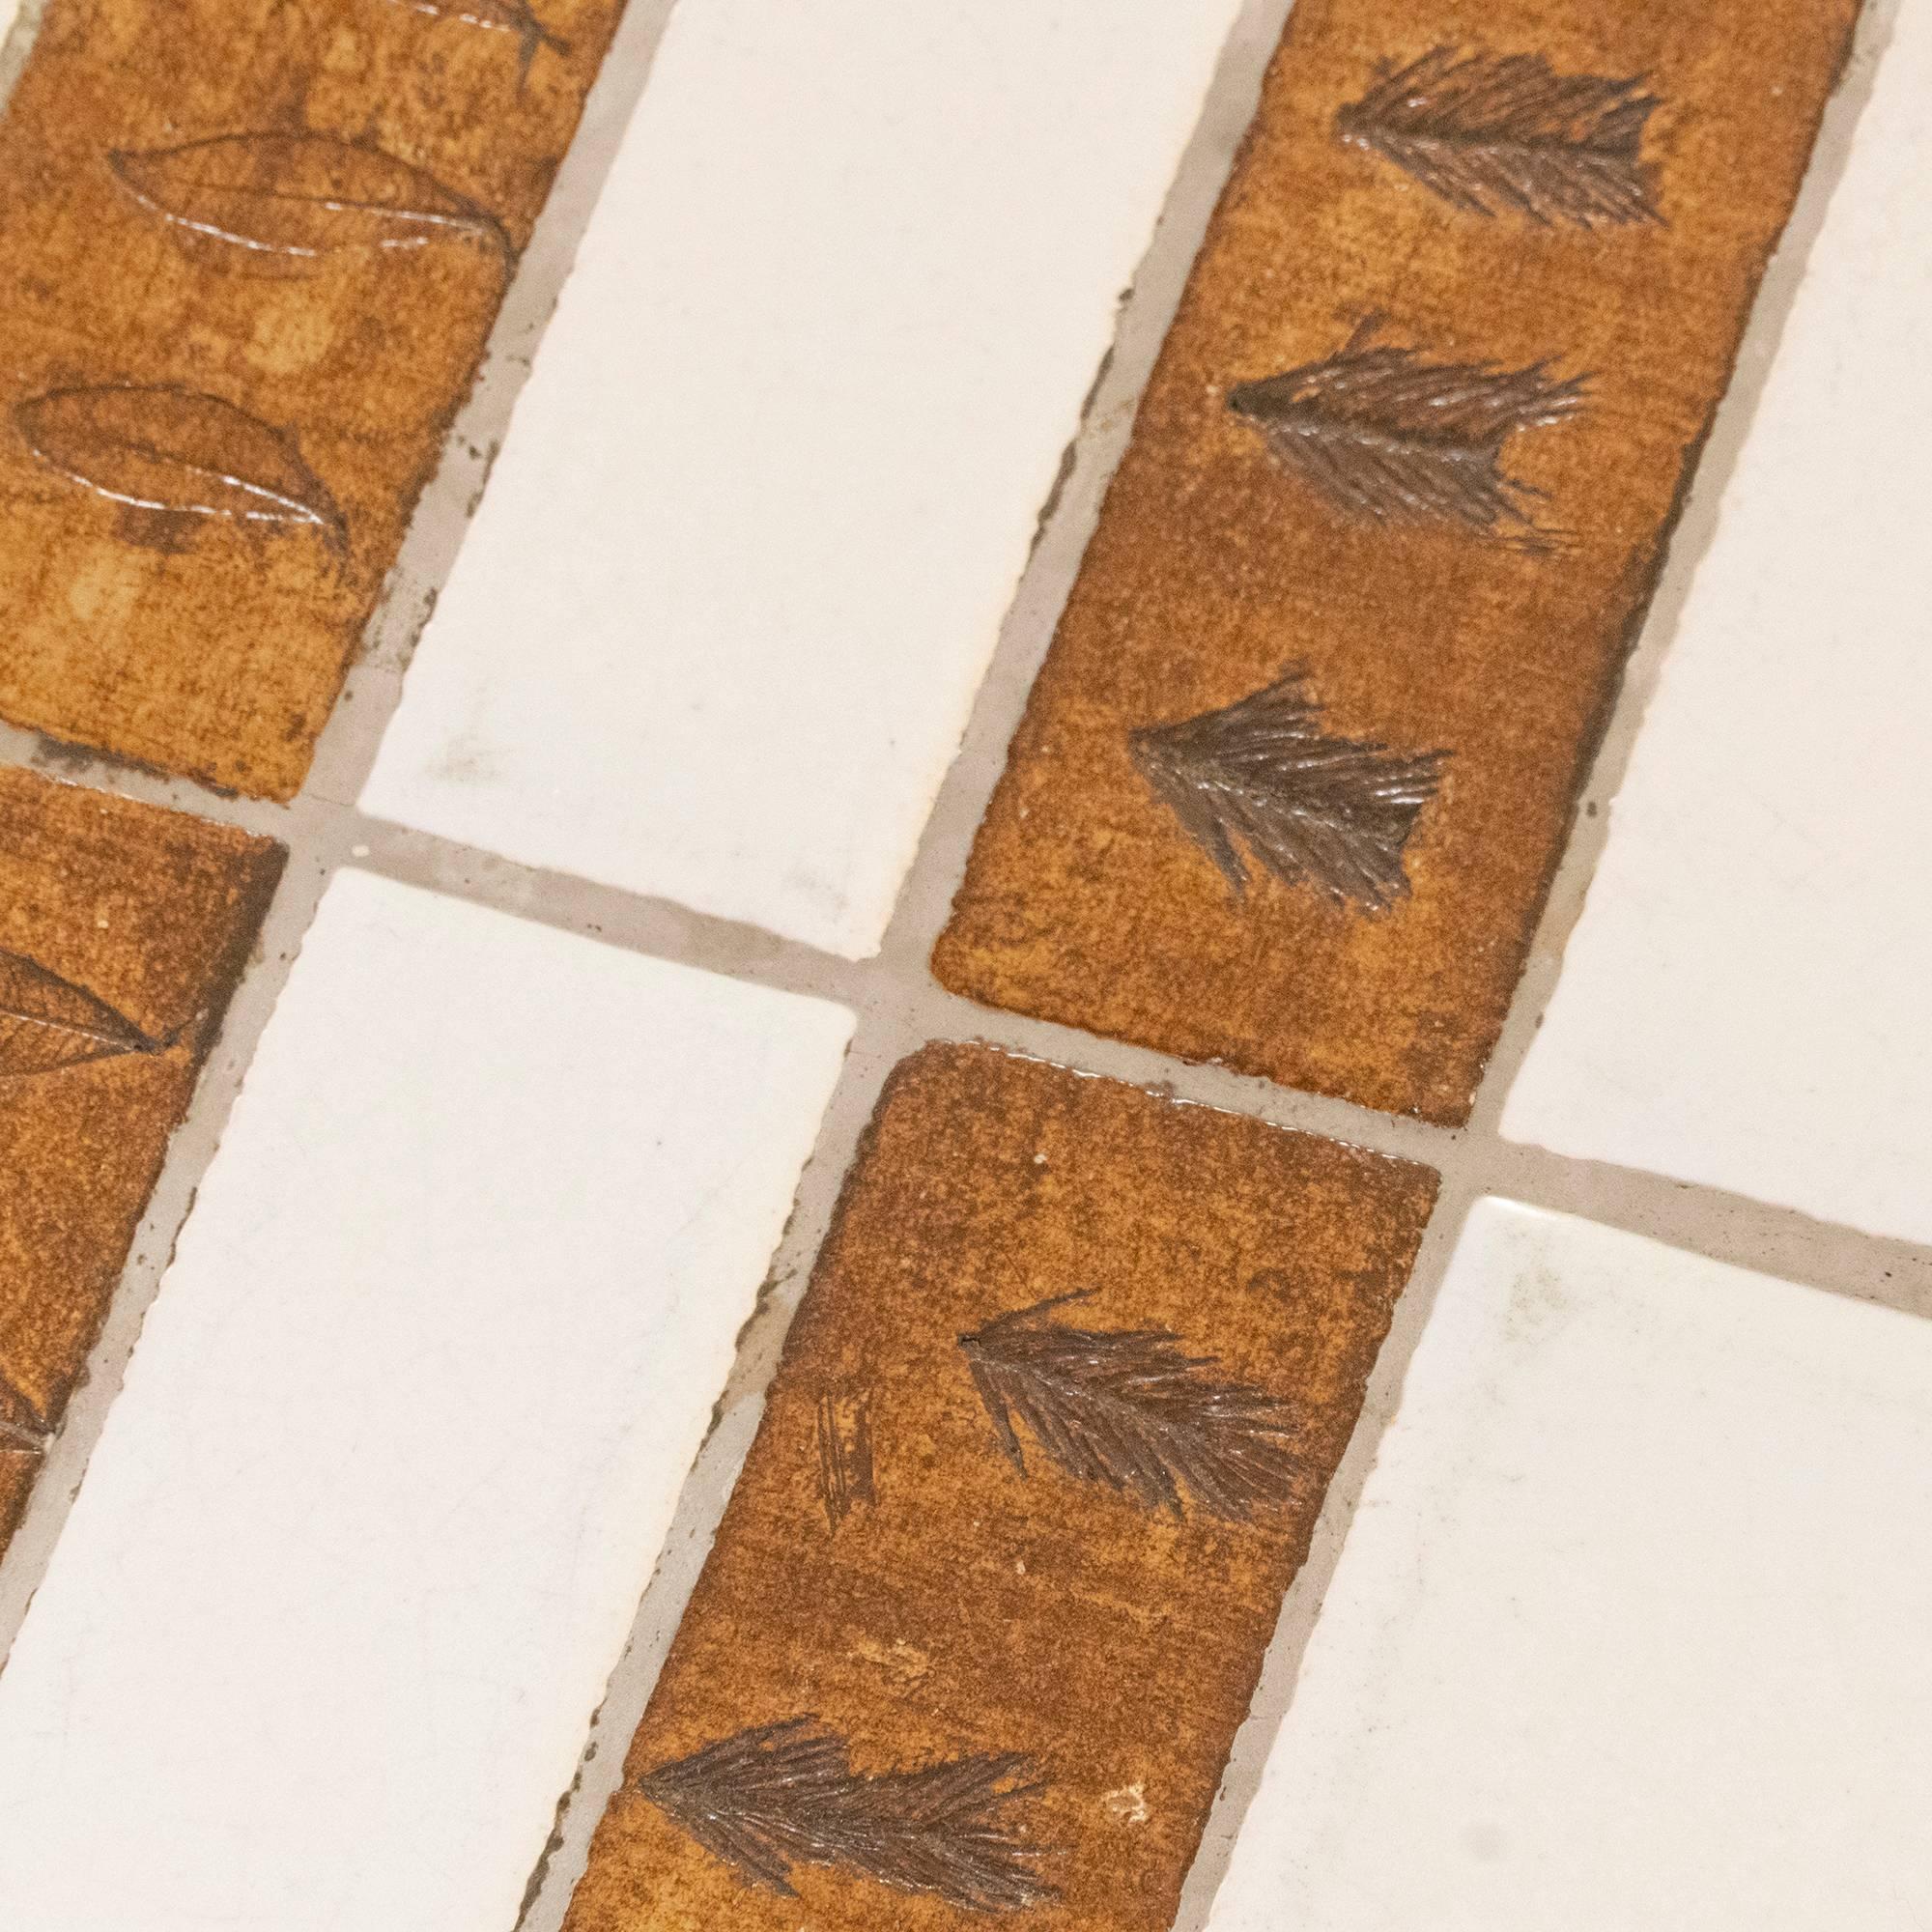 Stoneware tiles top with imprints leaves from the Garrigue series by Roger Capron, original wood structure with perfect vintage patina, France, circa 1960s.